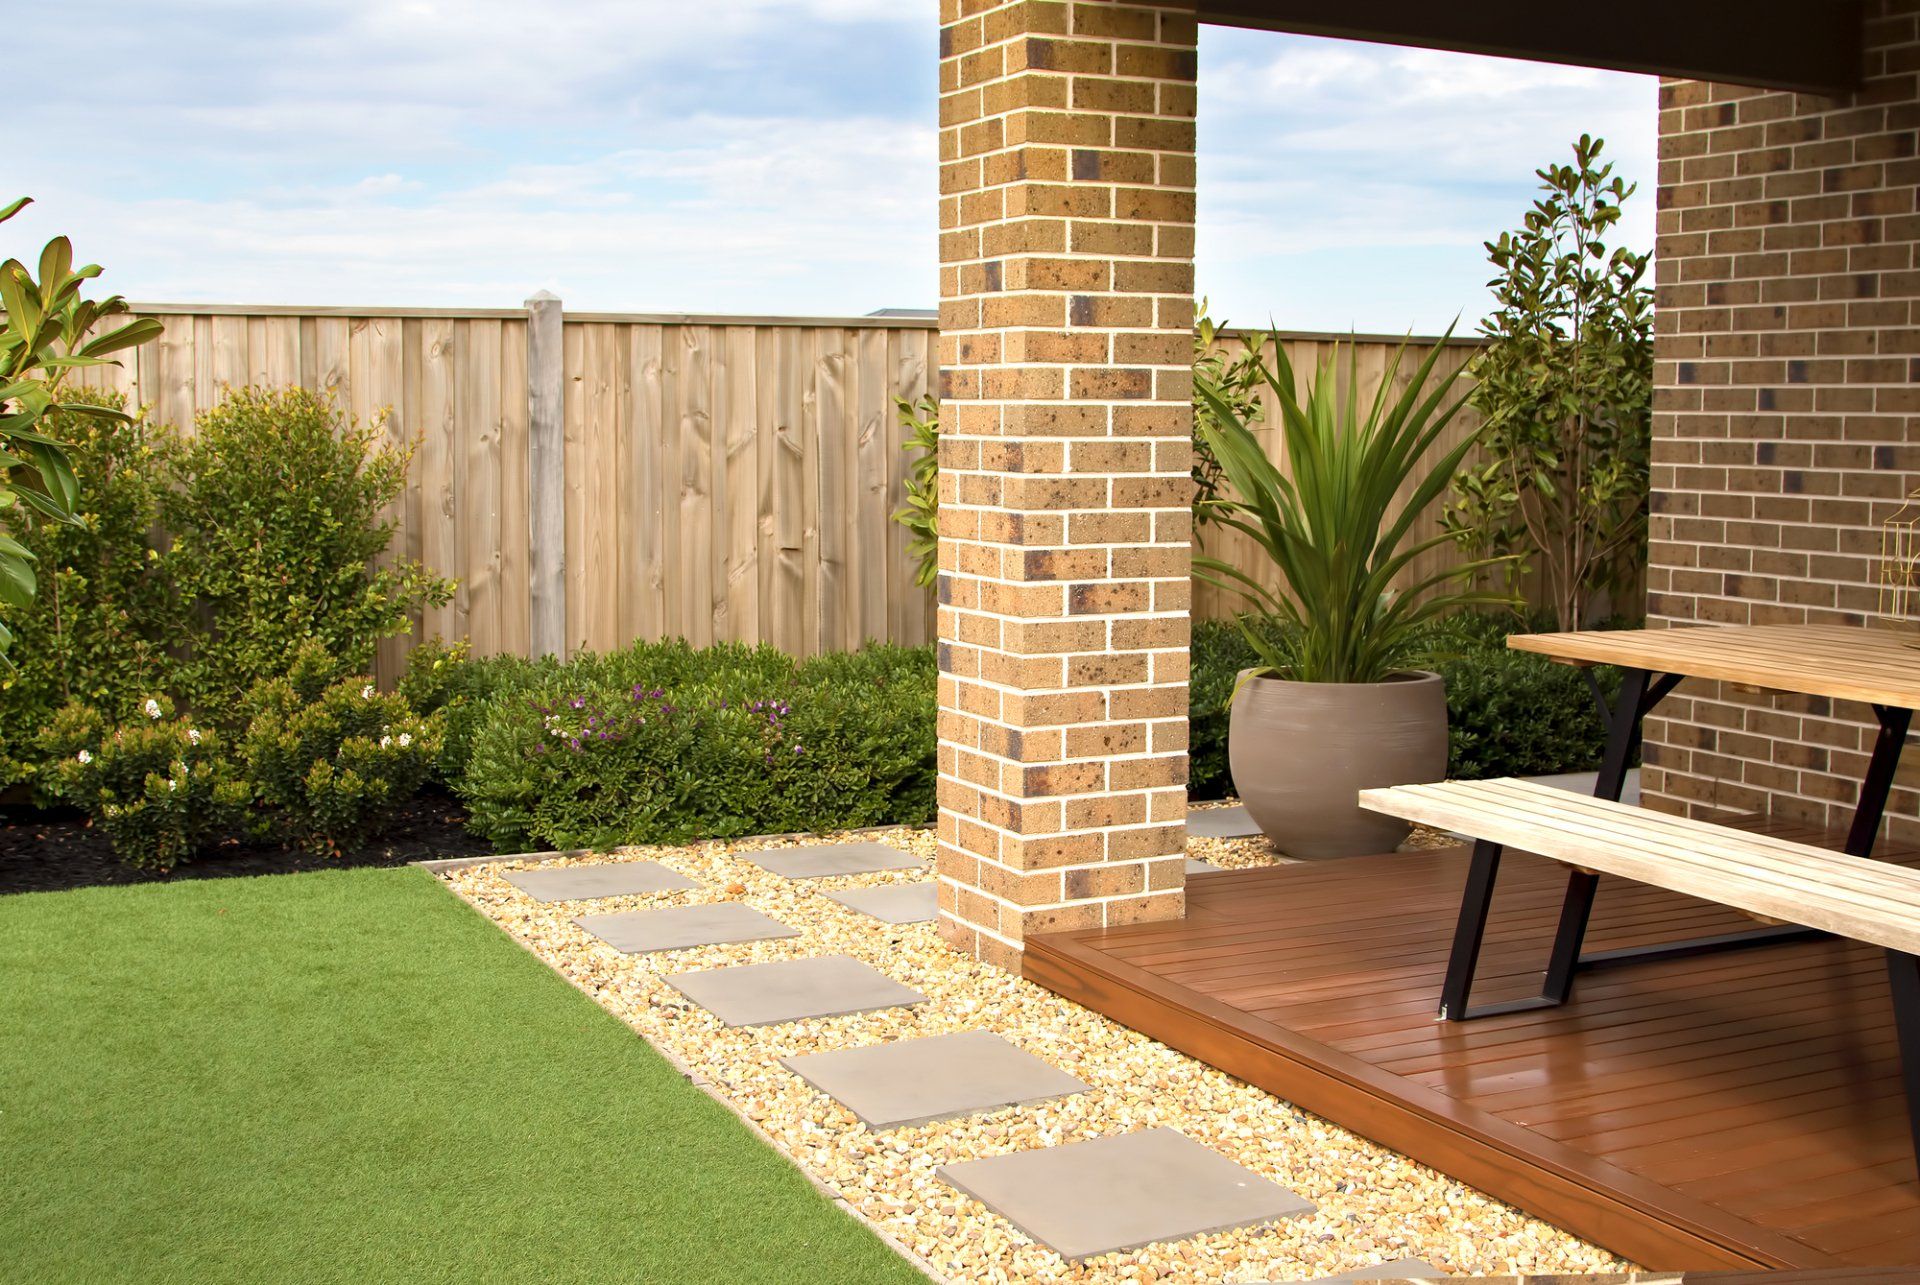 this artificial grass from Scottsdale Artificial Turf is giving this patio a natural touch